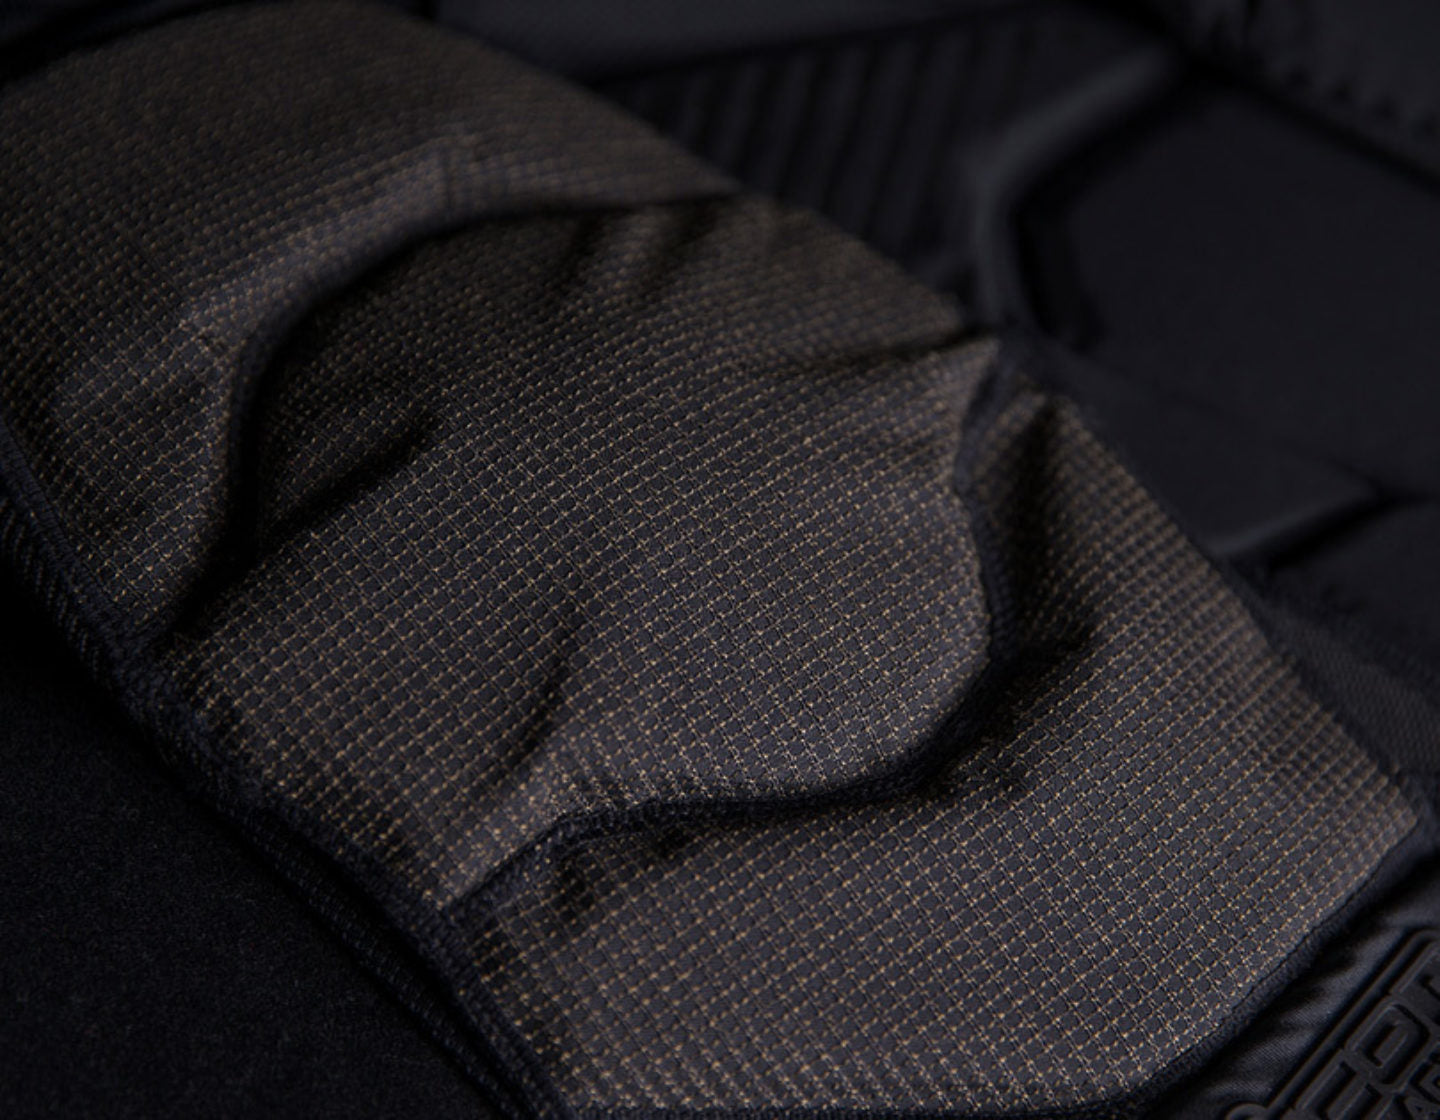 Icon Street Racing | Introducing The Field Armor Compression Shirt